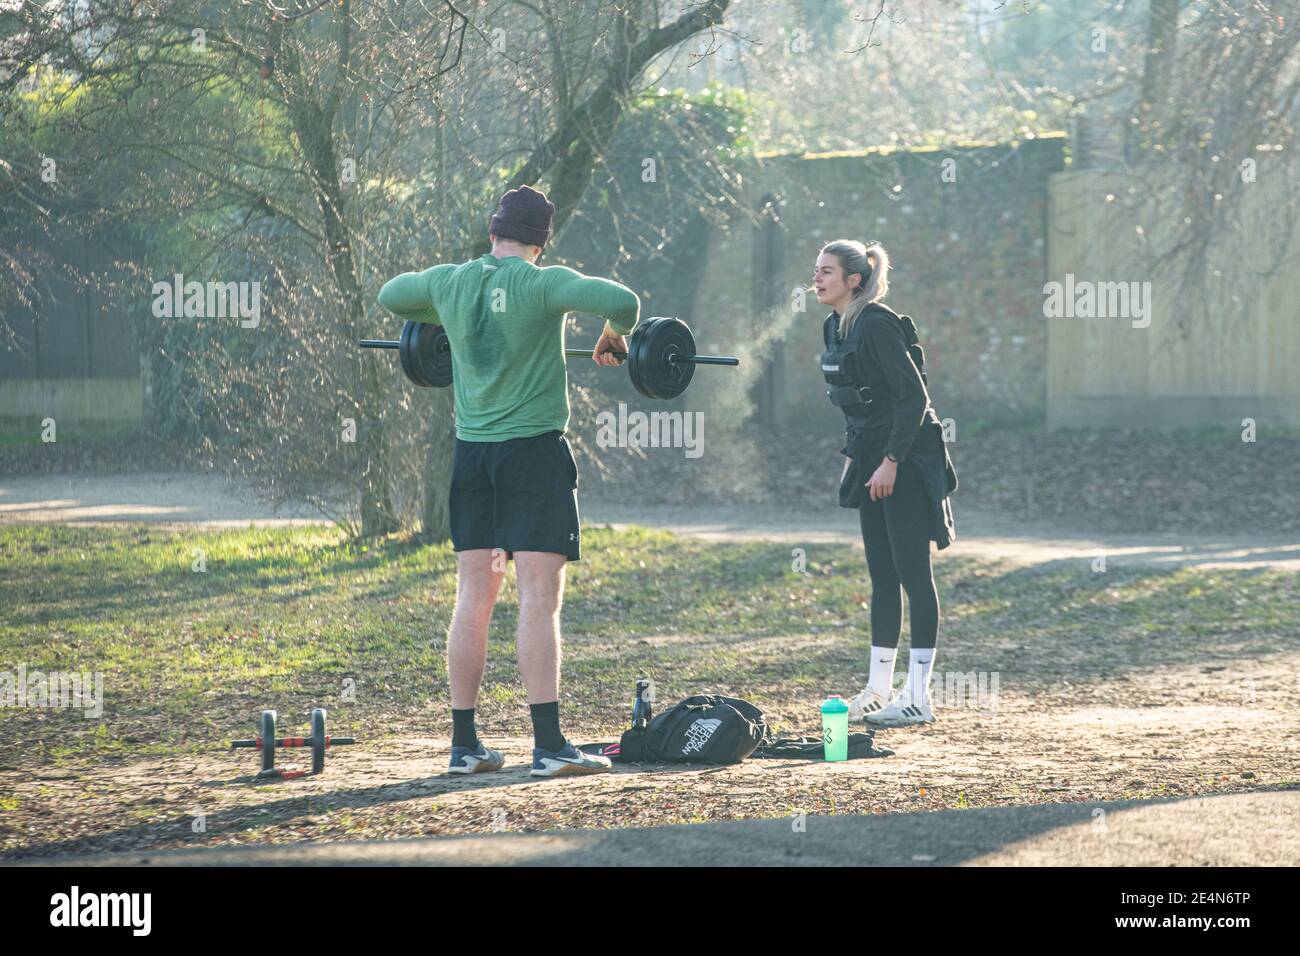 A man and a woman keep fit and lift weights during lockdown in a London park Stock Photo